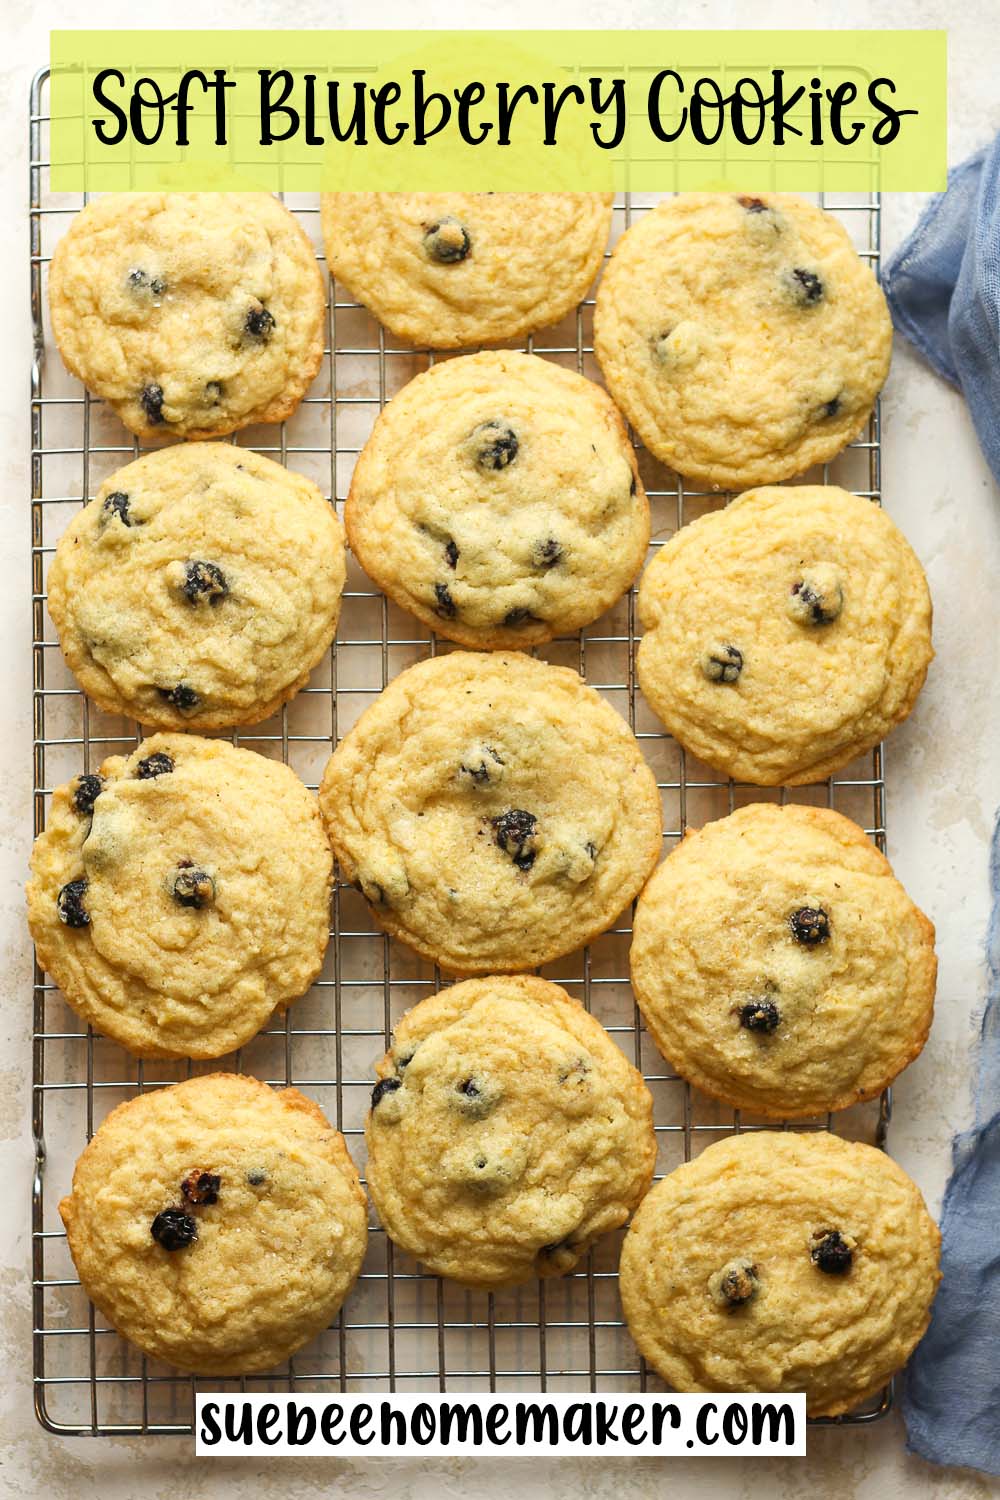 A baking rack with soft blueberry cookies.